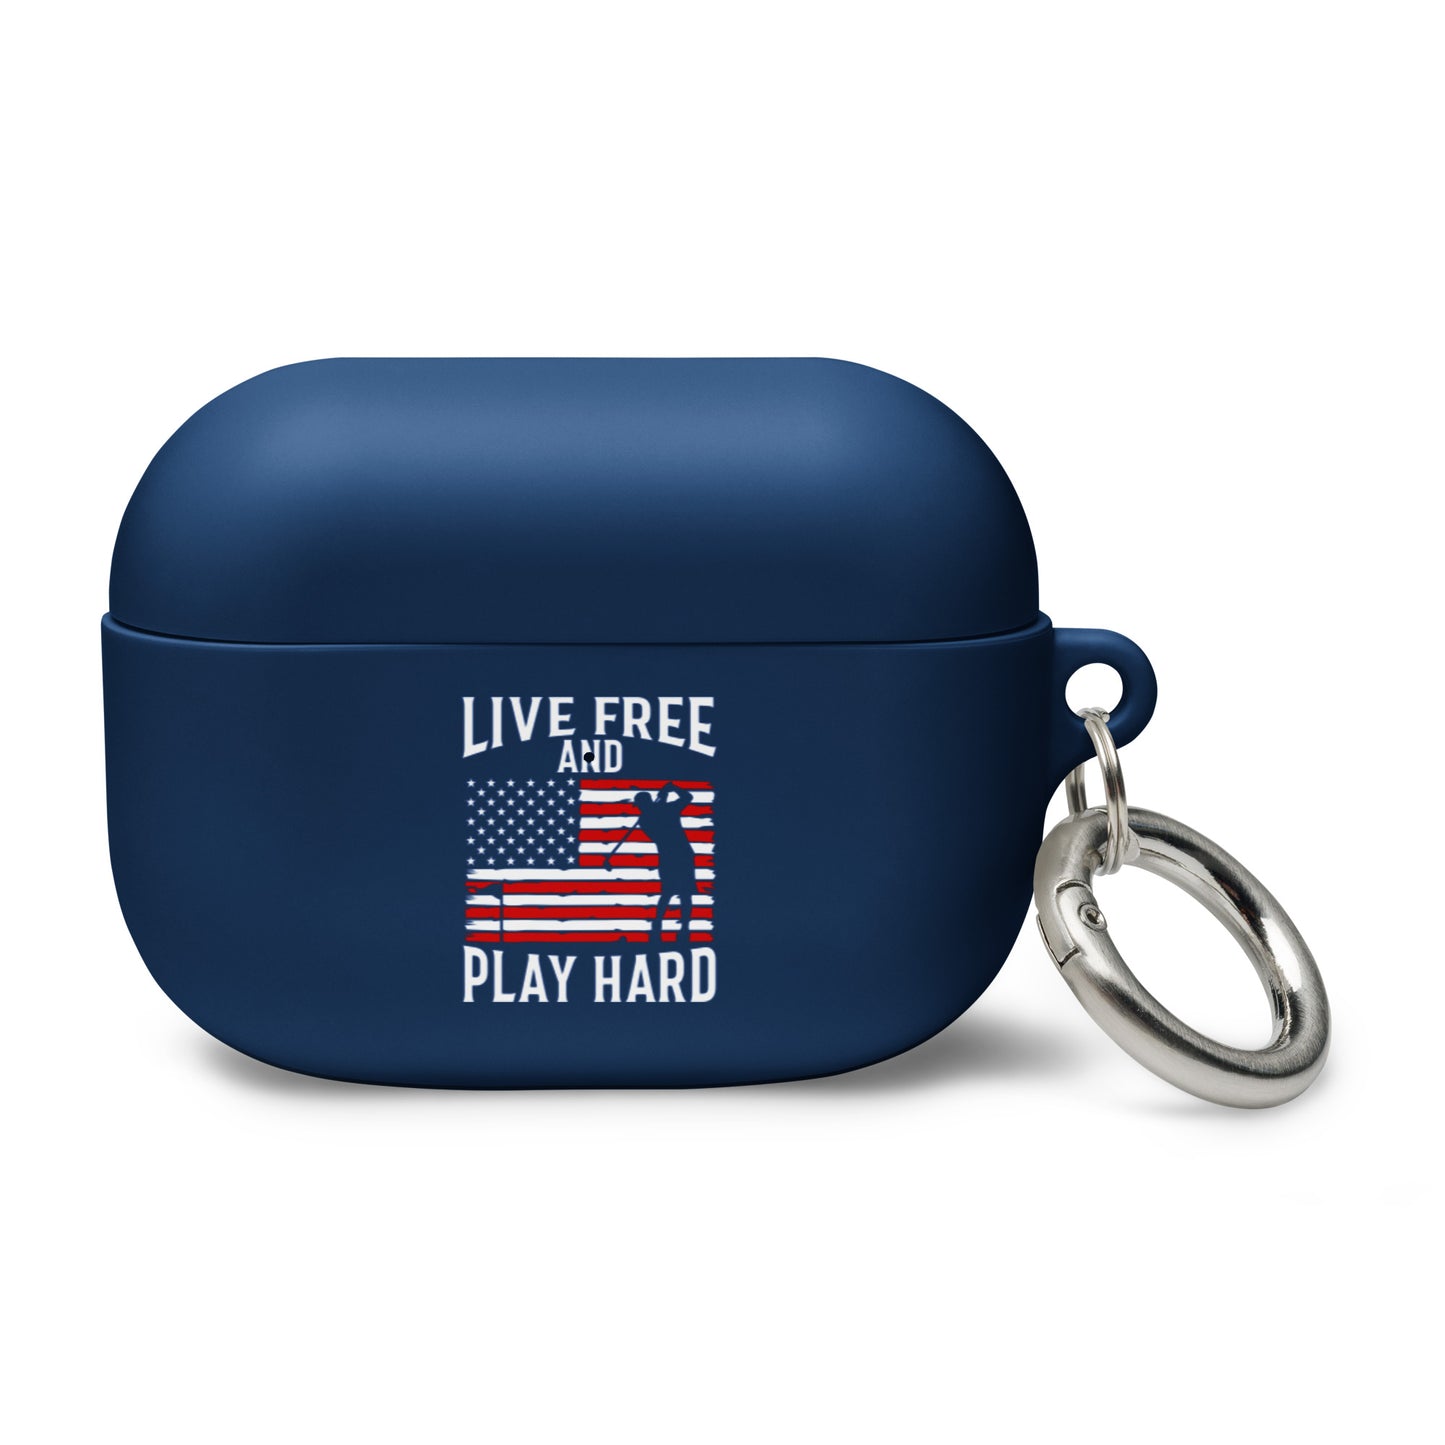 Live Free and Play Hard AirPods Case